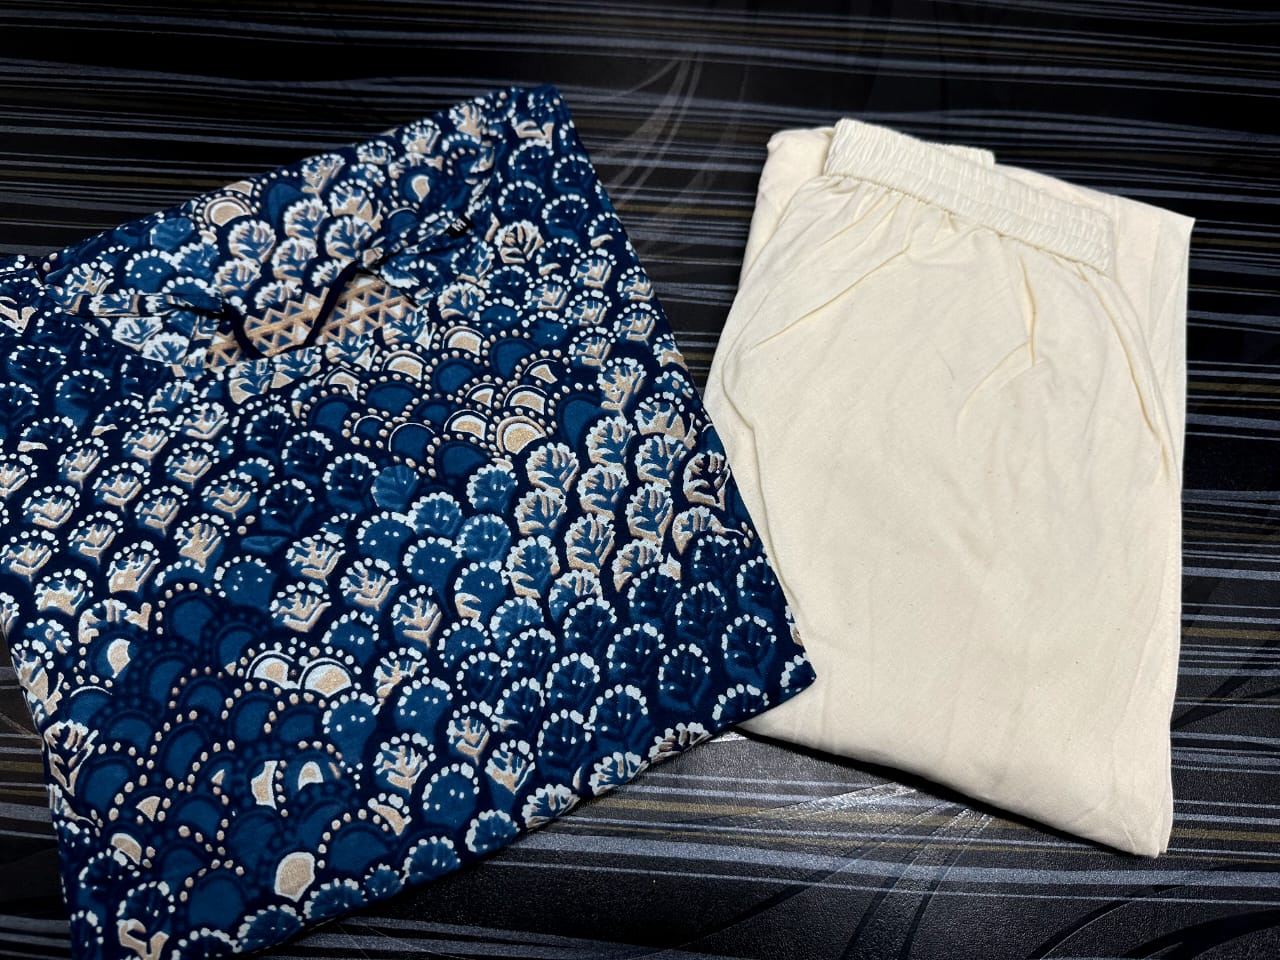 Cotton 60*60 Top and Dhoti Pant Set with 3/4th Sleeves